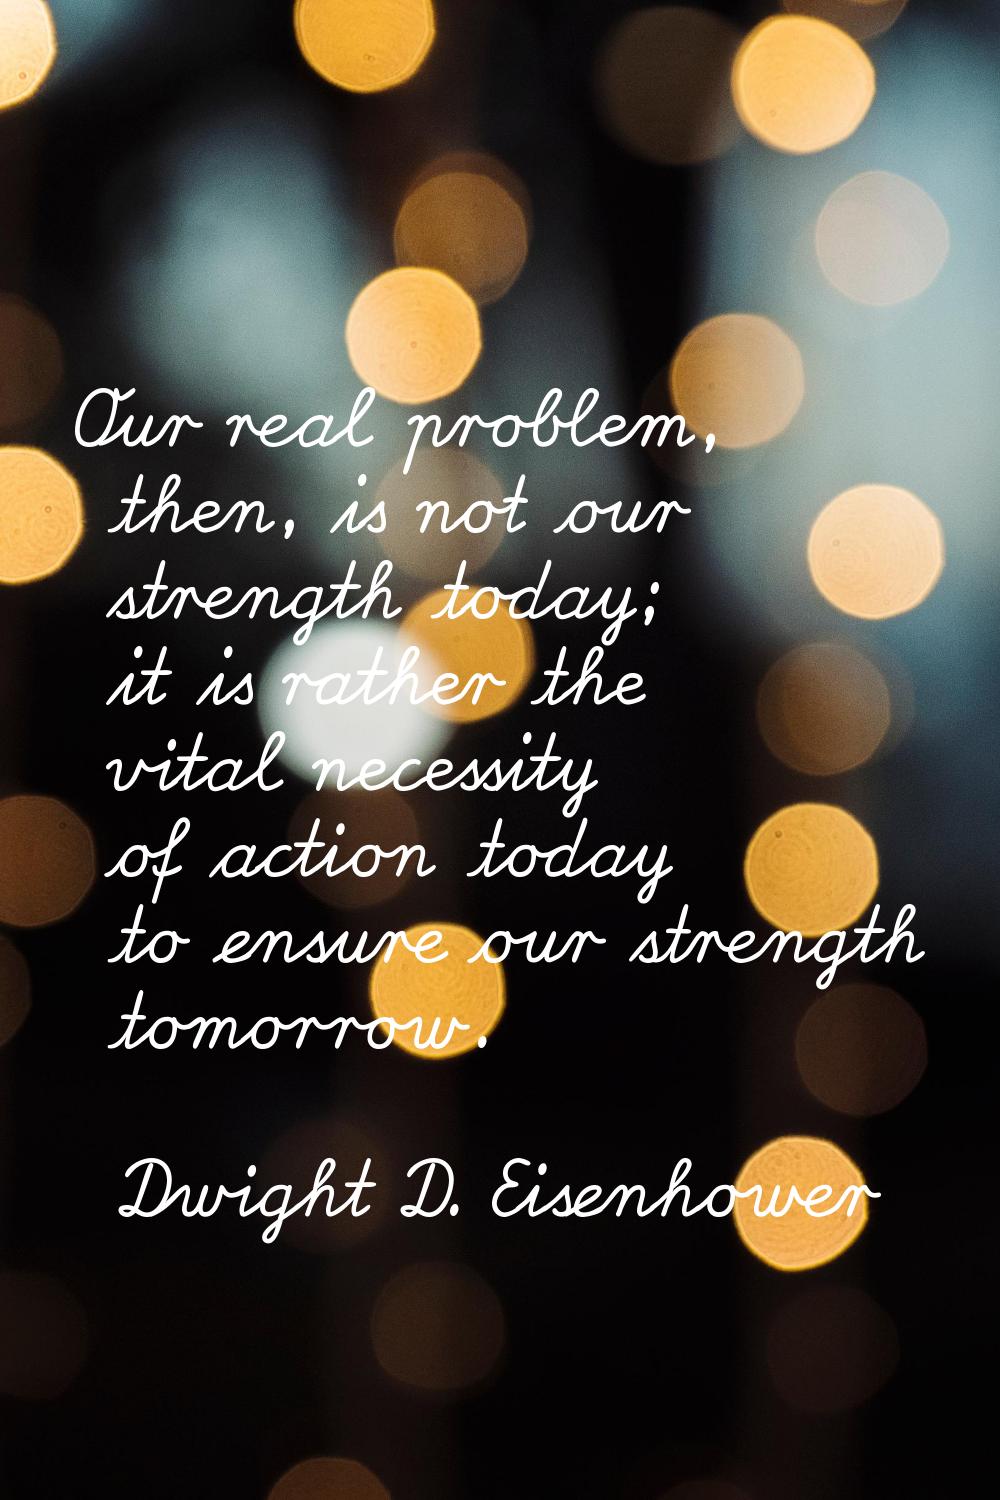 Our real problem, then, is not our strength today; it is rather the vital necessity of action today